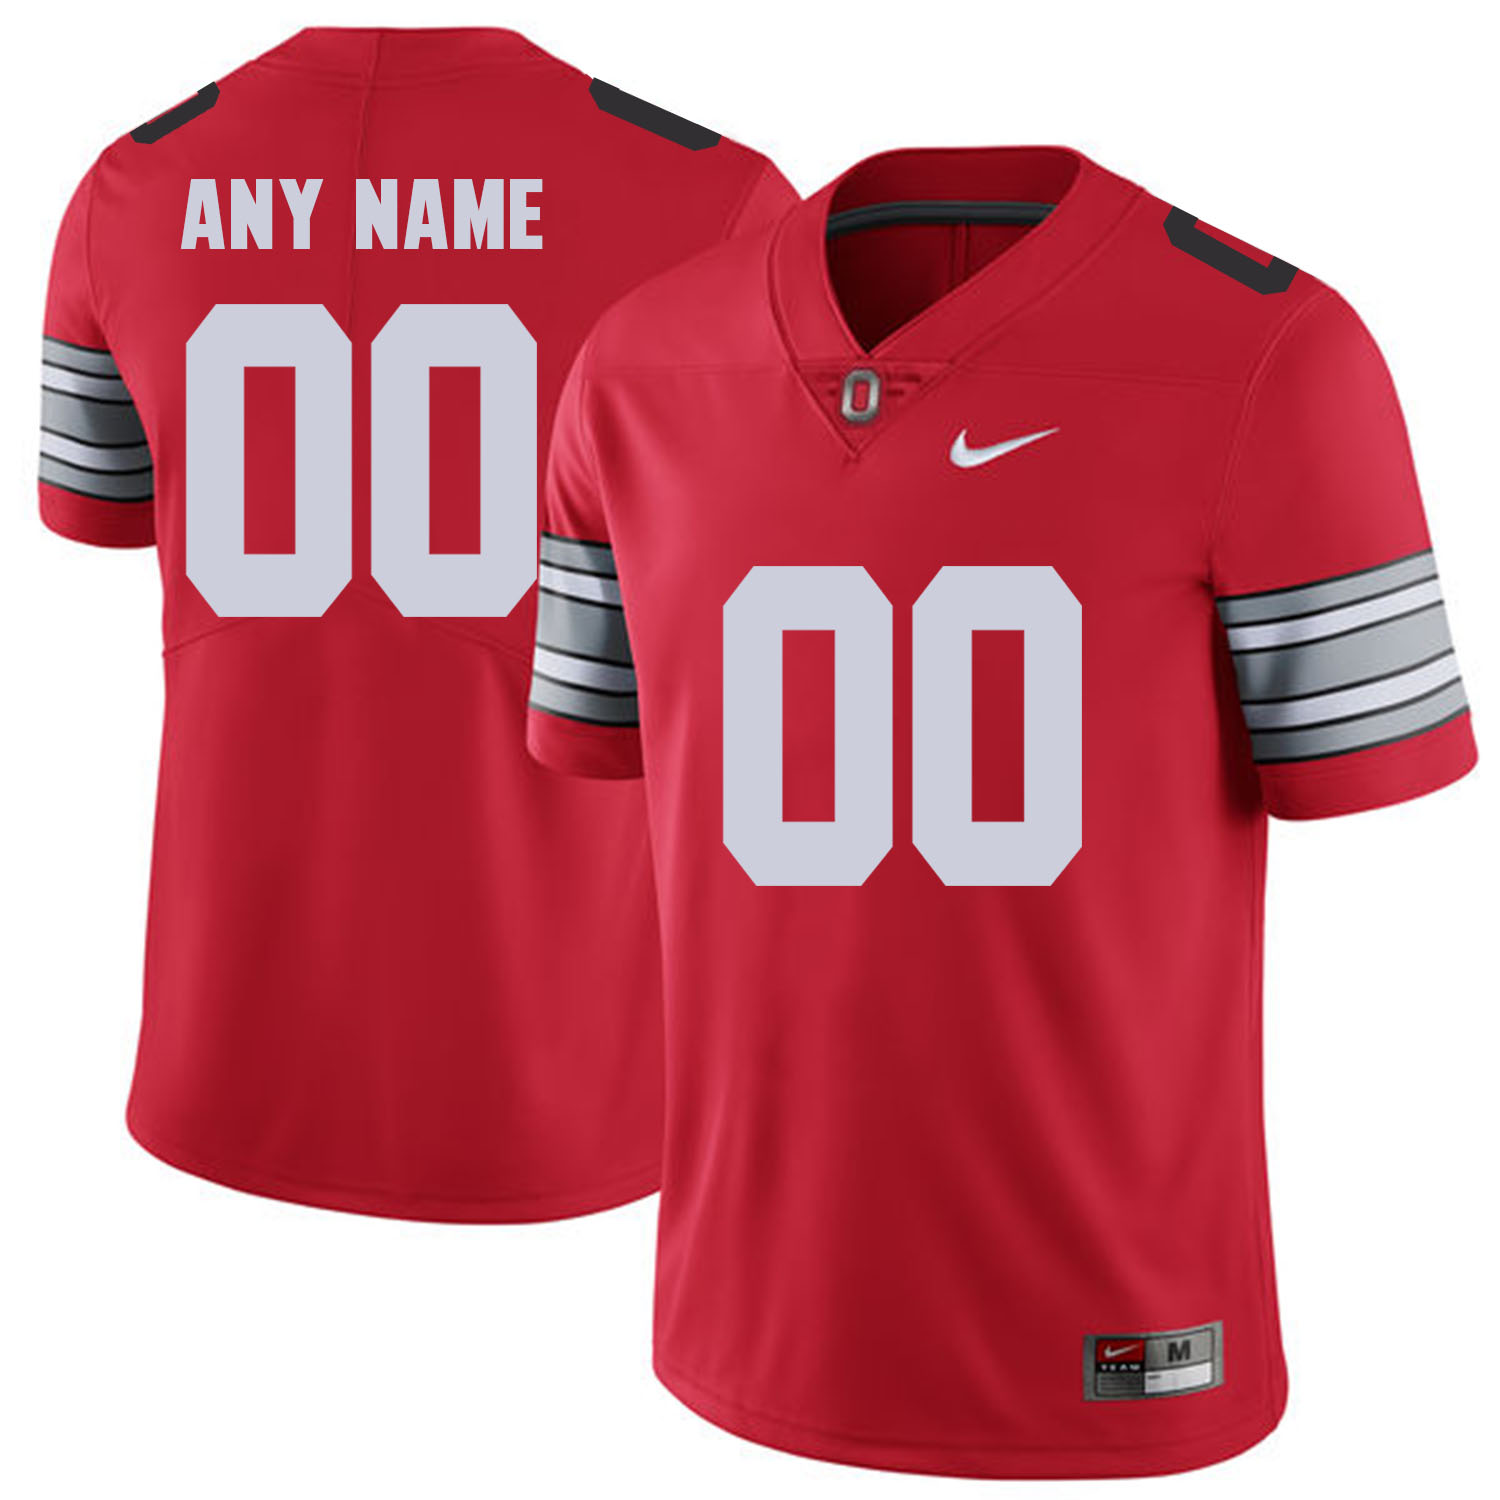 Ohio State Buckeyes Red Customized 2018 Spring Game College Football Limited Jersey